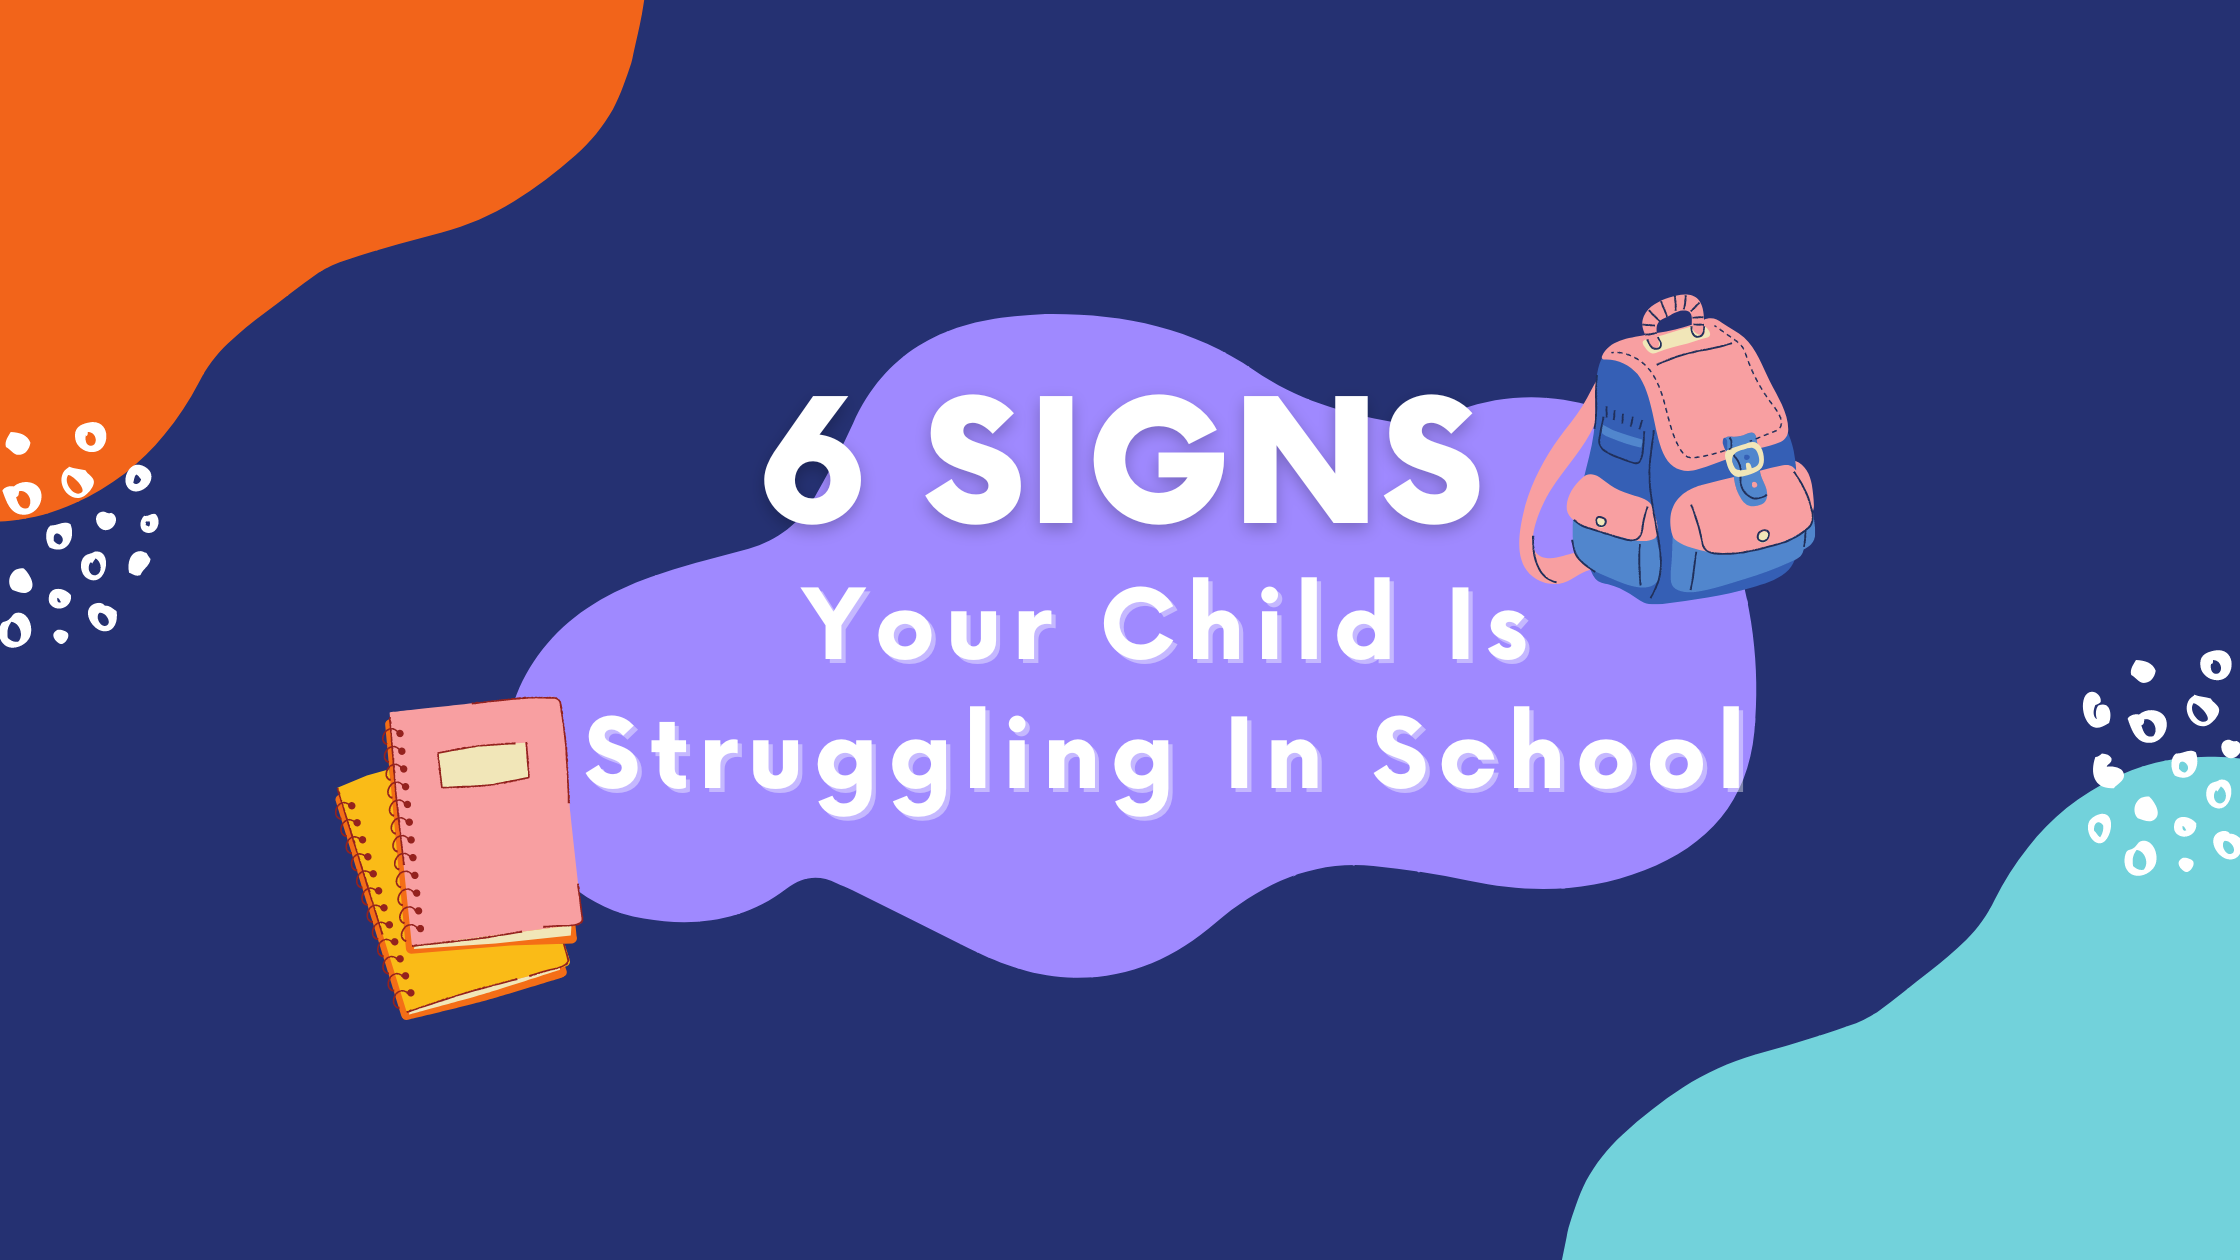 6 signs your child is struggling in school